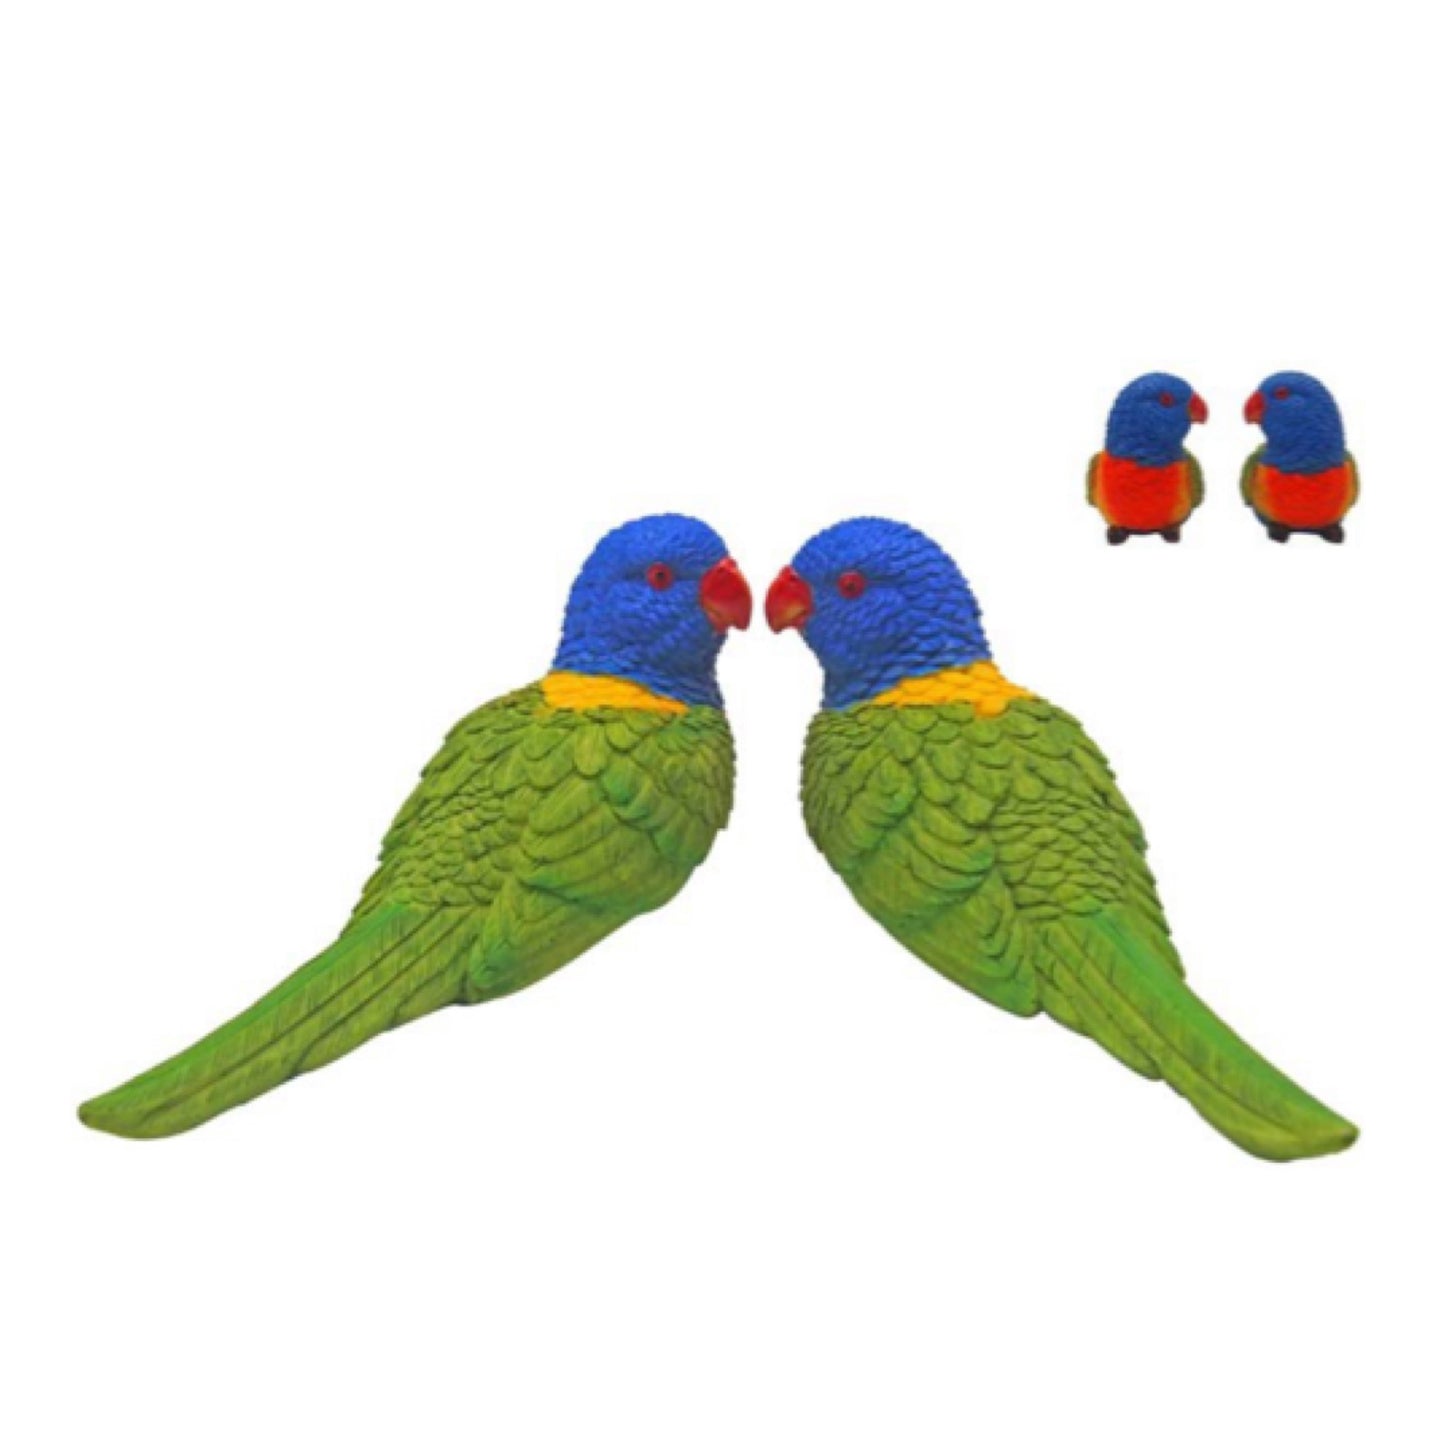 Parrot Lorikeet Ornament Paperweight - The Renmy Store